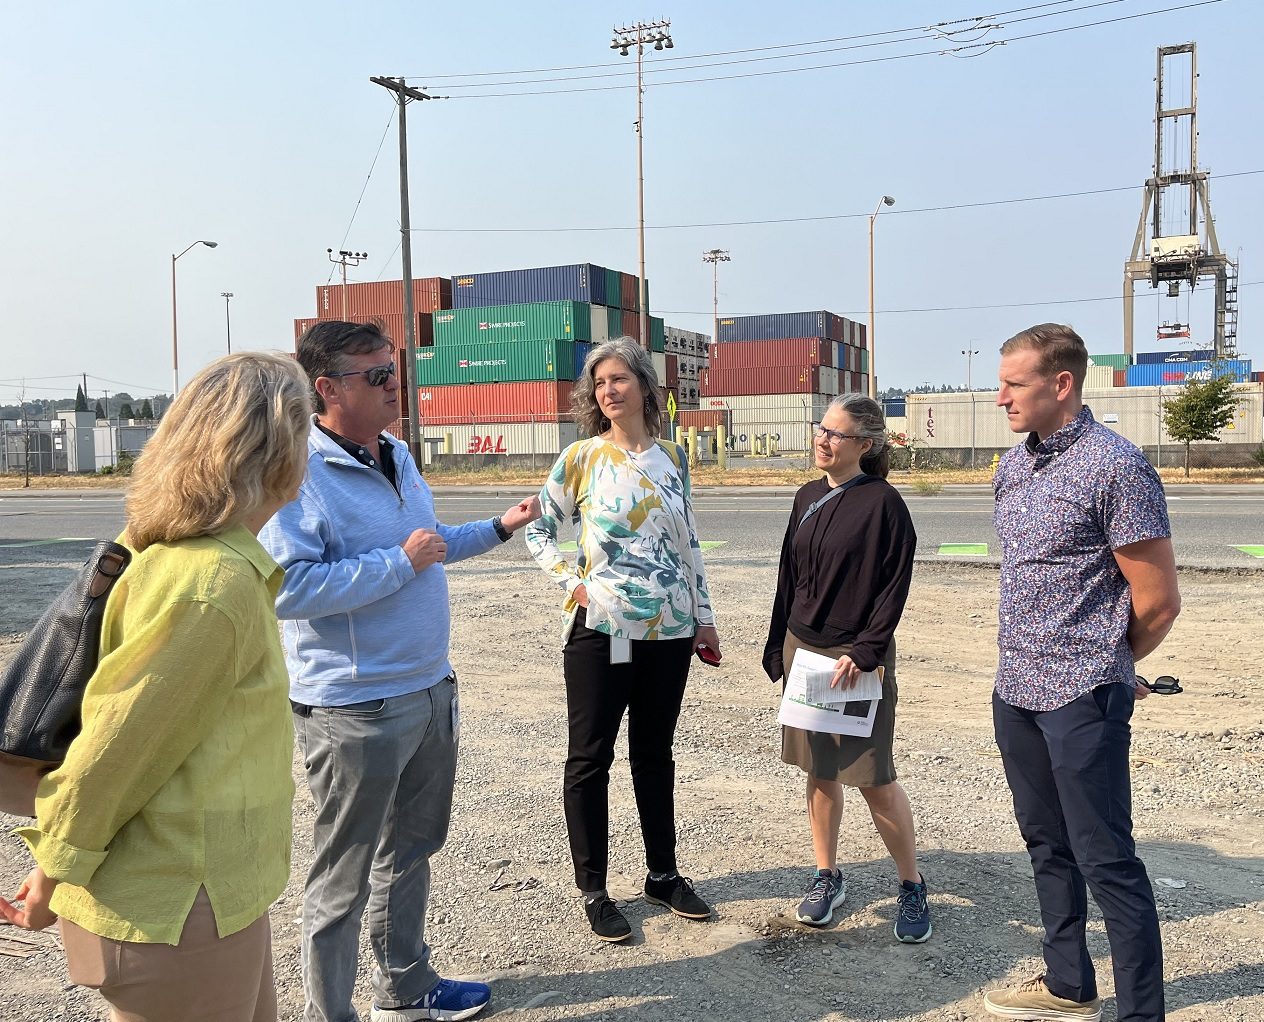 SDOT Director Greg Spotts tours East Marginal Way with the SDOT project team and representatives from the Port of Seattle. Five people stand talking in the foreground, with large Port of Seattle cargo containers and a crane in the background on a sunny day.